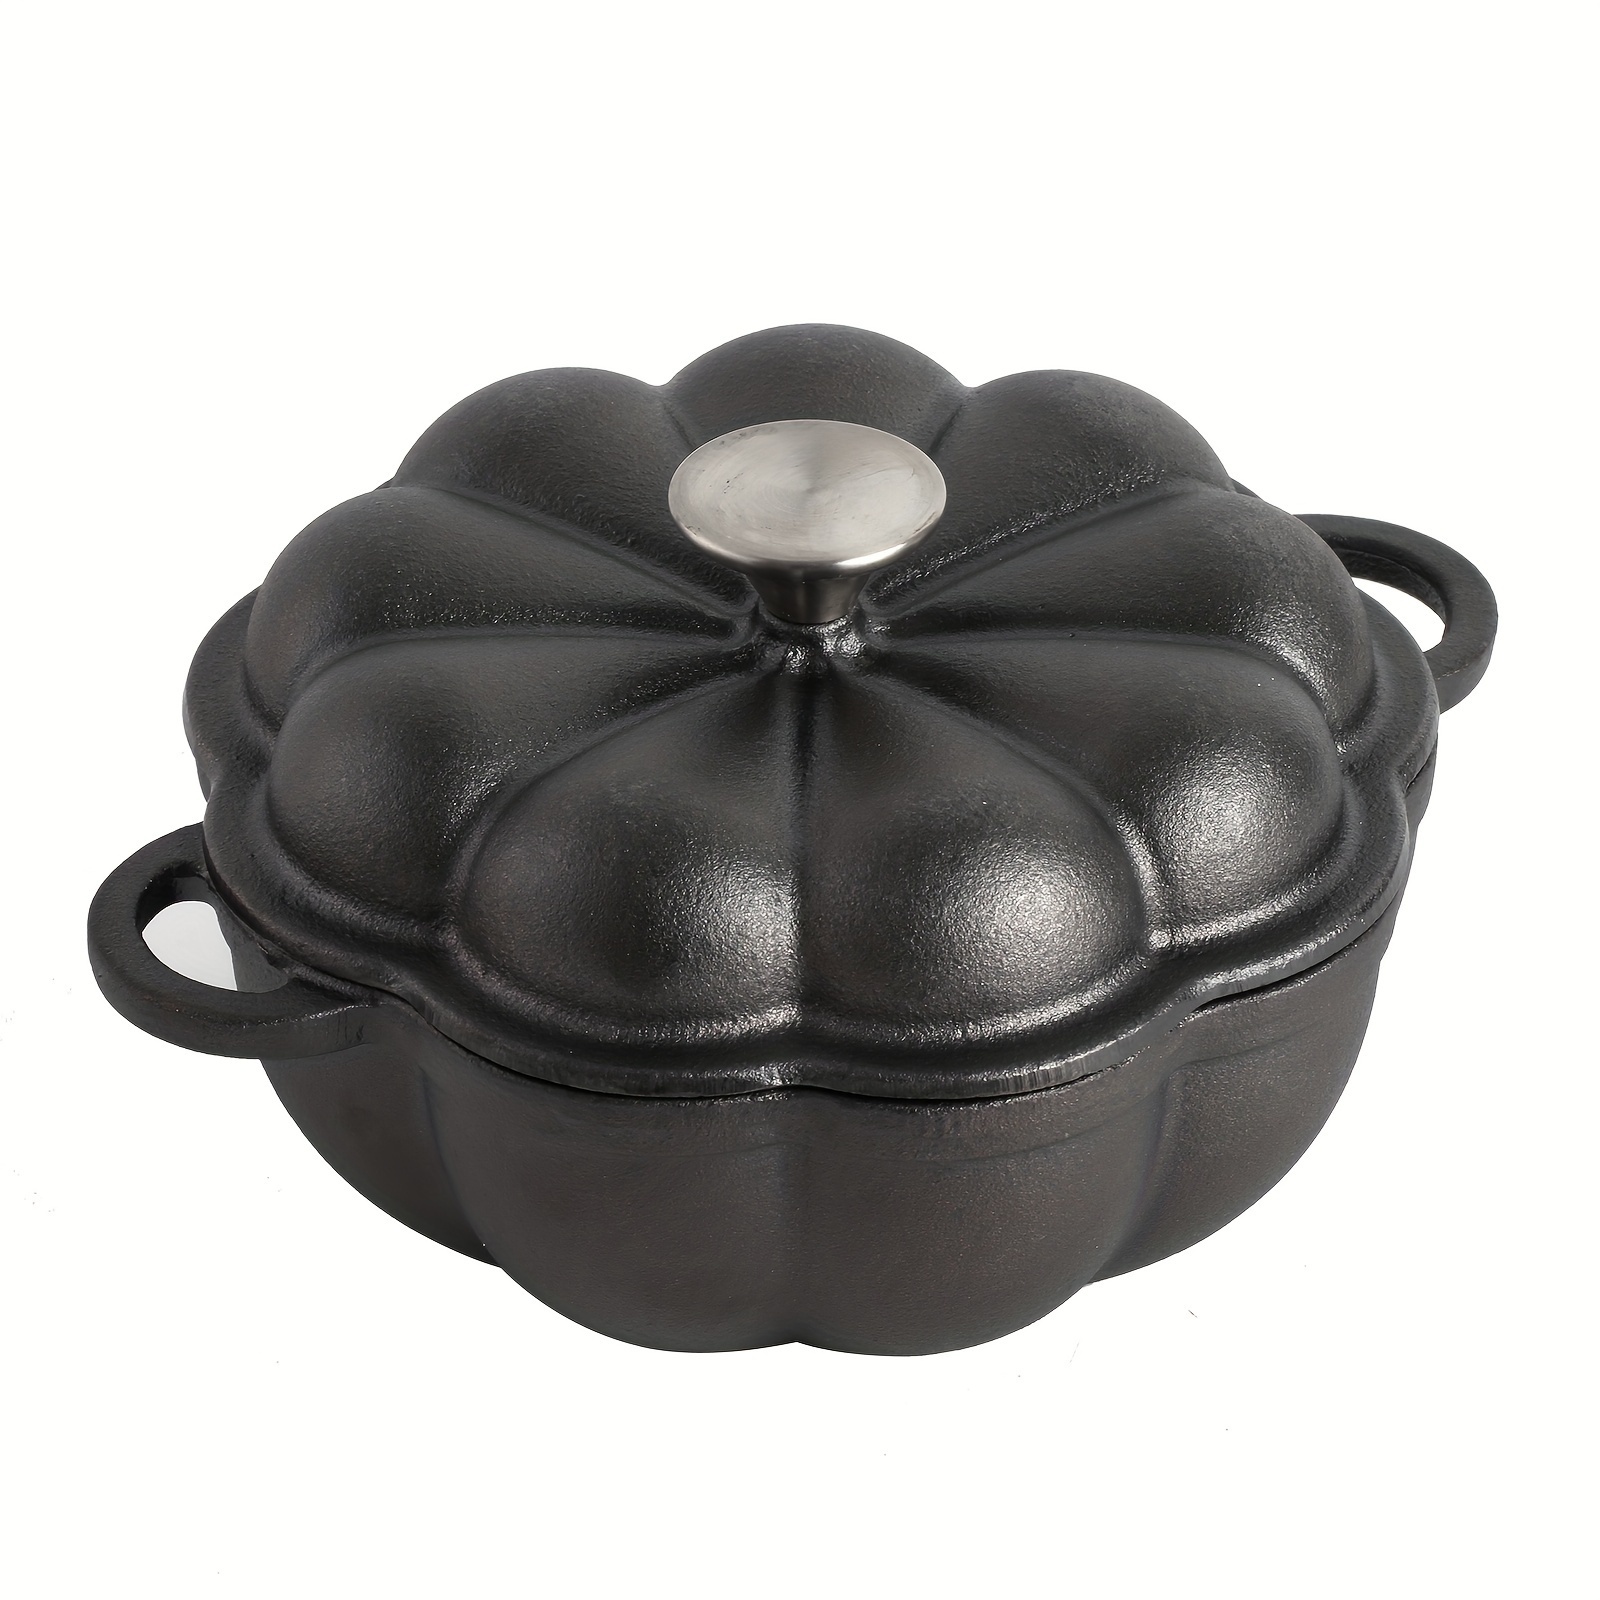 

Cast Iron Garlic Roaster, Heavy Duty Garlic Roaster With Lid, Pumpkin Shaped Garlic Baker Garlic Cooker For Oven, Grill, Stove, Bbq, Barbecue